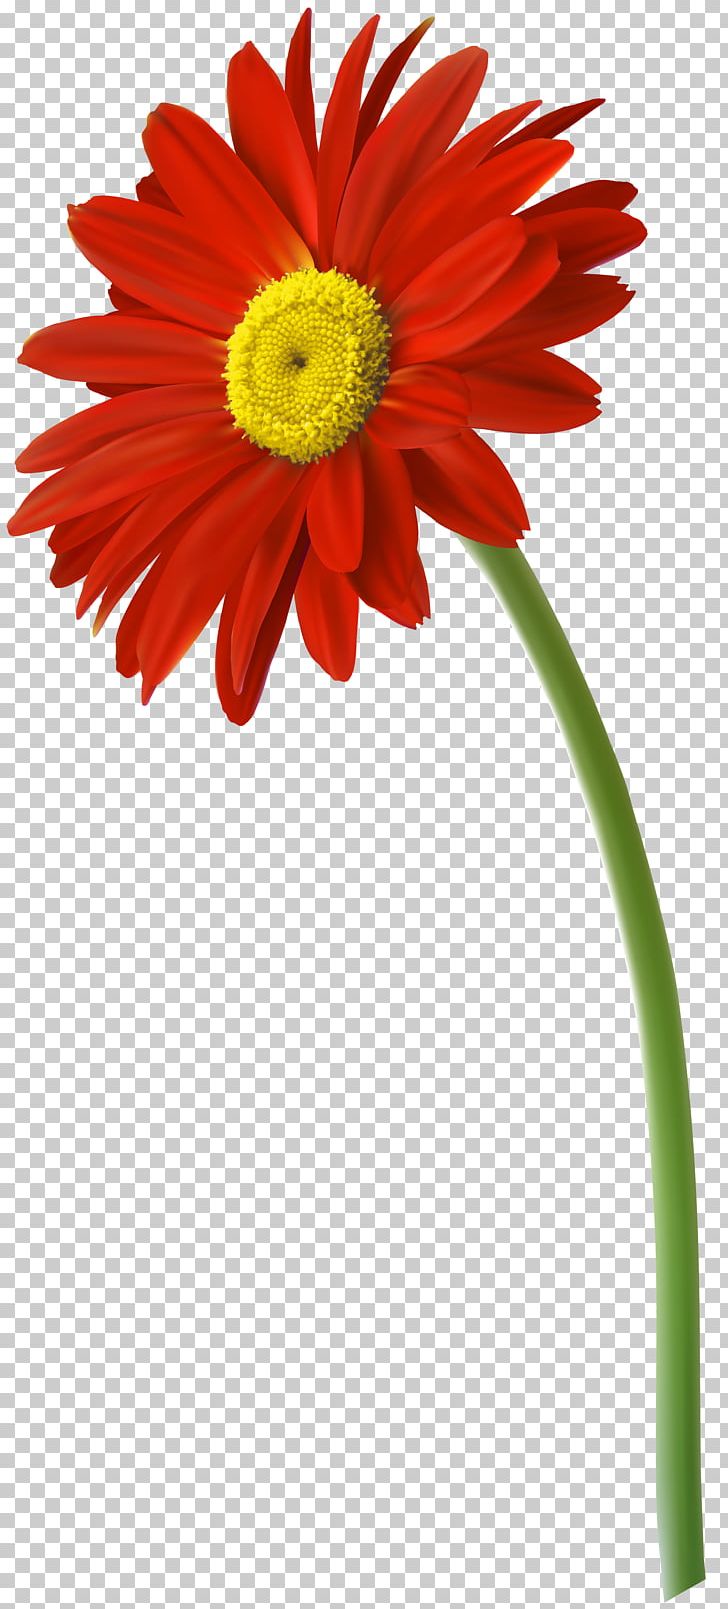 Flower Gerbera Jamesonii PNG, Clipart, Chrysanths, Clip Art, Cut Flowers, Daisy, Daisy Family Free PNG Download